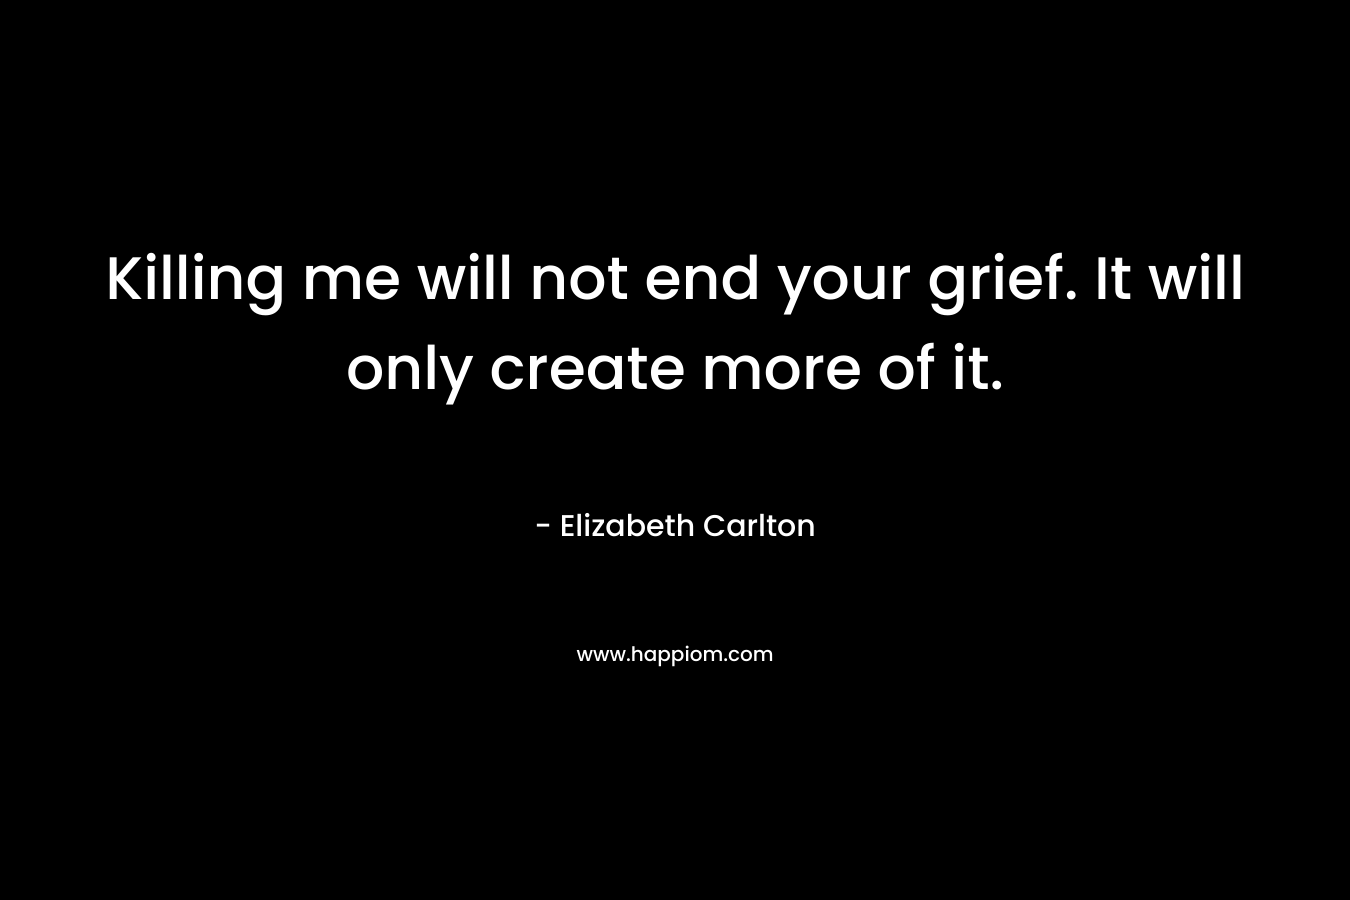 Killing me will not end your grief. It will only create more of it.